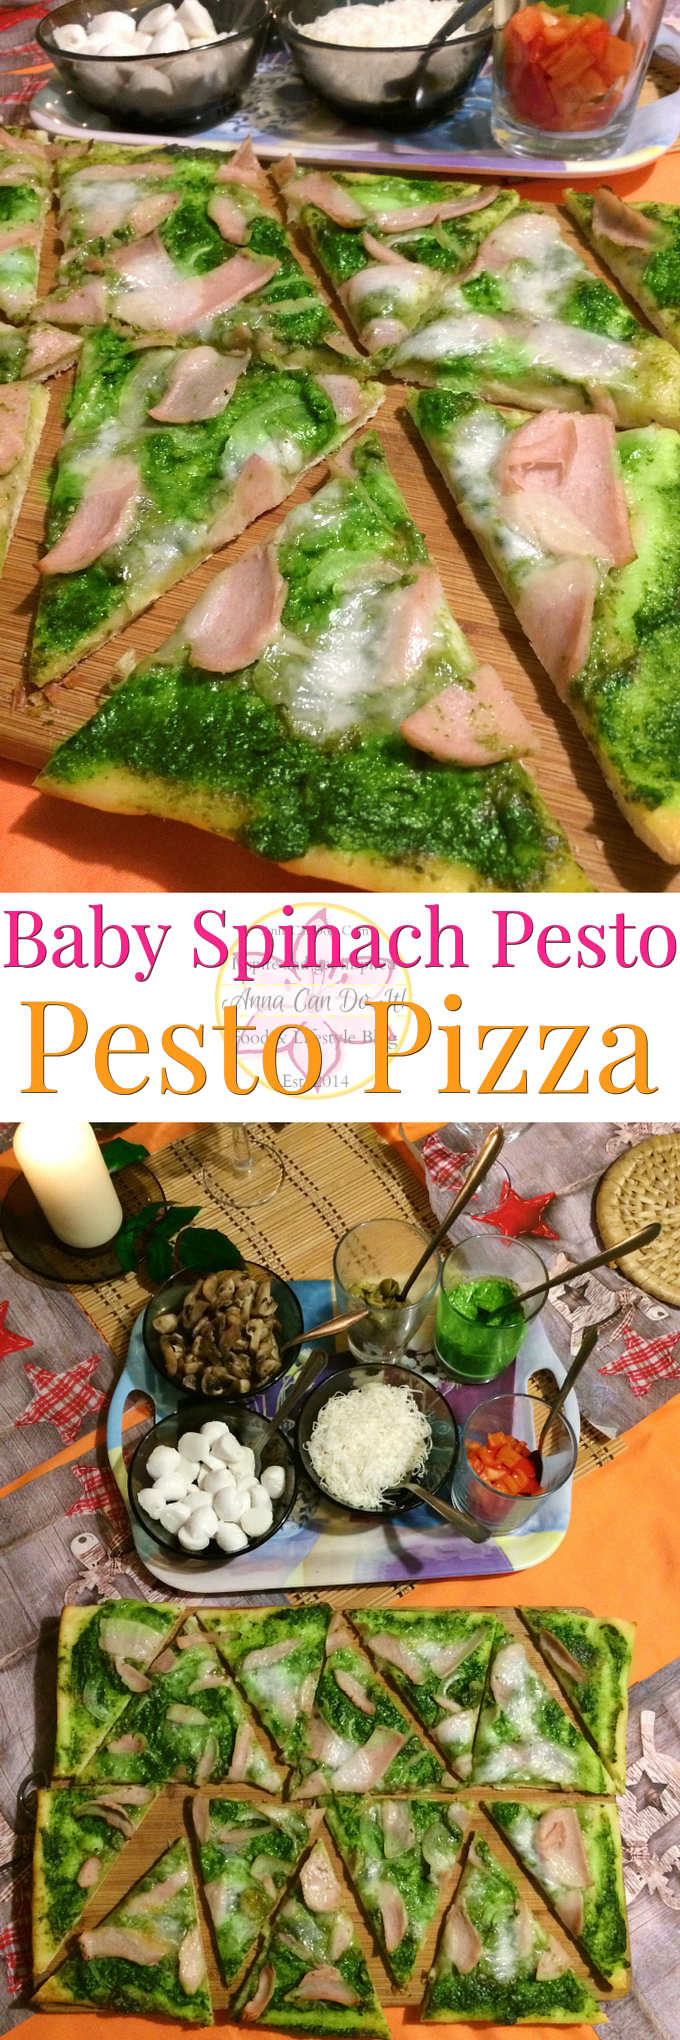 Baby Spinach Pesto - Pesto Pizza - Anna Can Do It! - Spinach Pesto is the pure green gold and now my family's favorite! This pesto is made with baby spinach and cashews. Spinach pesto is so simple to make and so tasty, you'll put it on everything! 